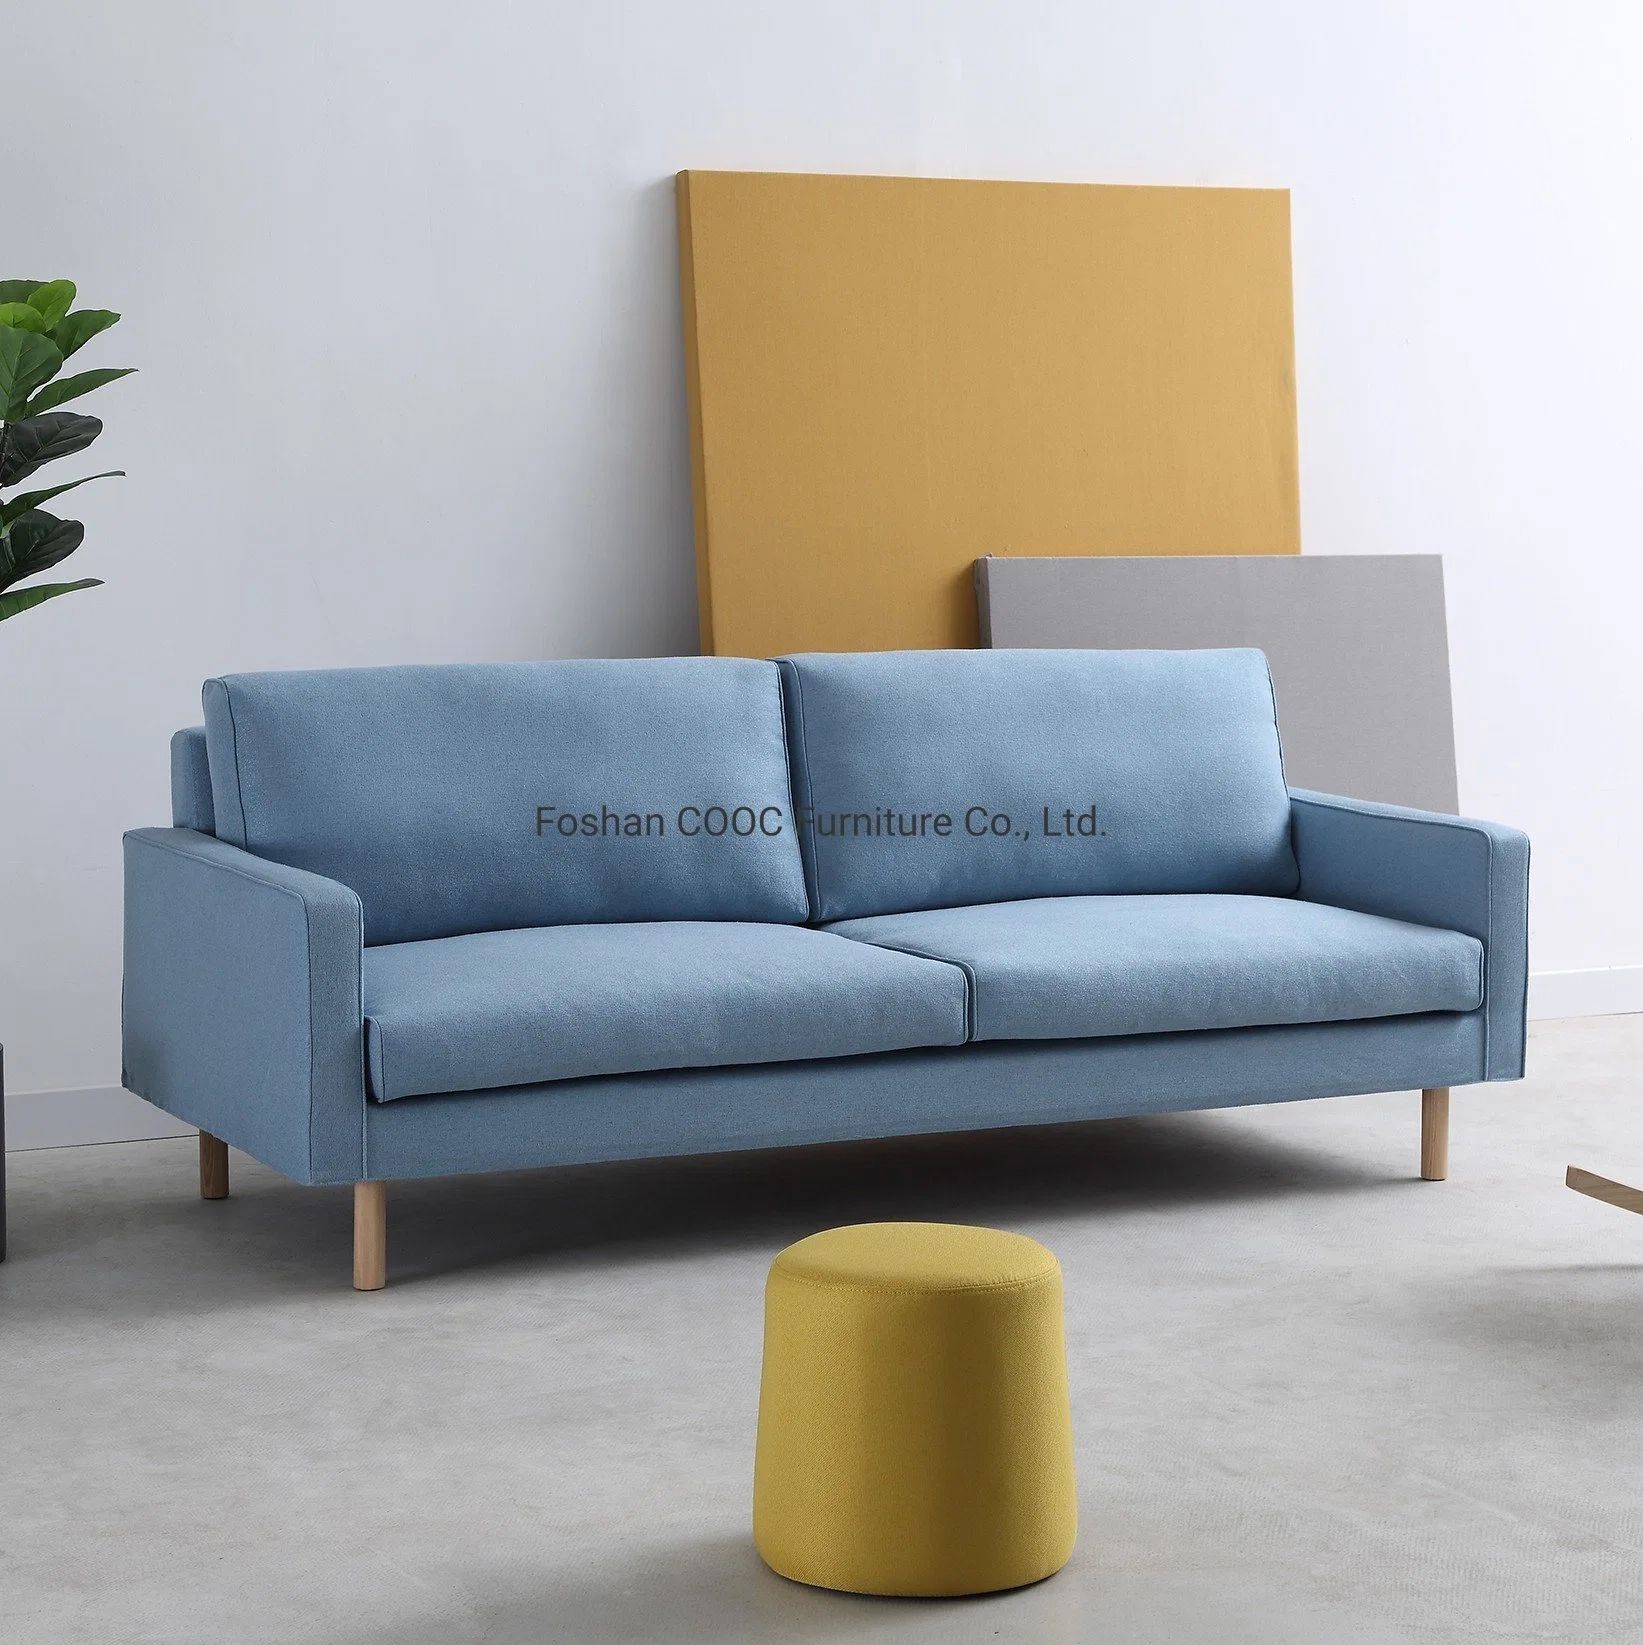 Cooc Best Chinese Wholesale Nordic Design Blue Linen Couches Sofa Set Modern  Fabric Sofa Apartment Living Room Home Furniture – China Sofa, Fabric Sofa  | Made In China Throughout Modern Blue Linen Sofas (View 11 of 15)